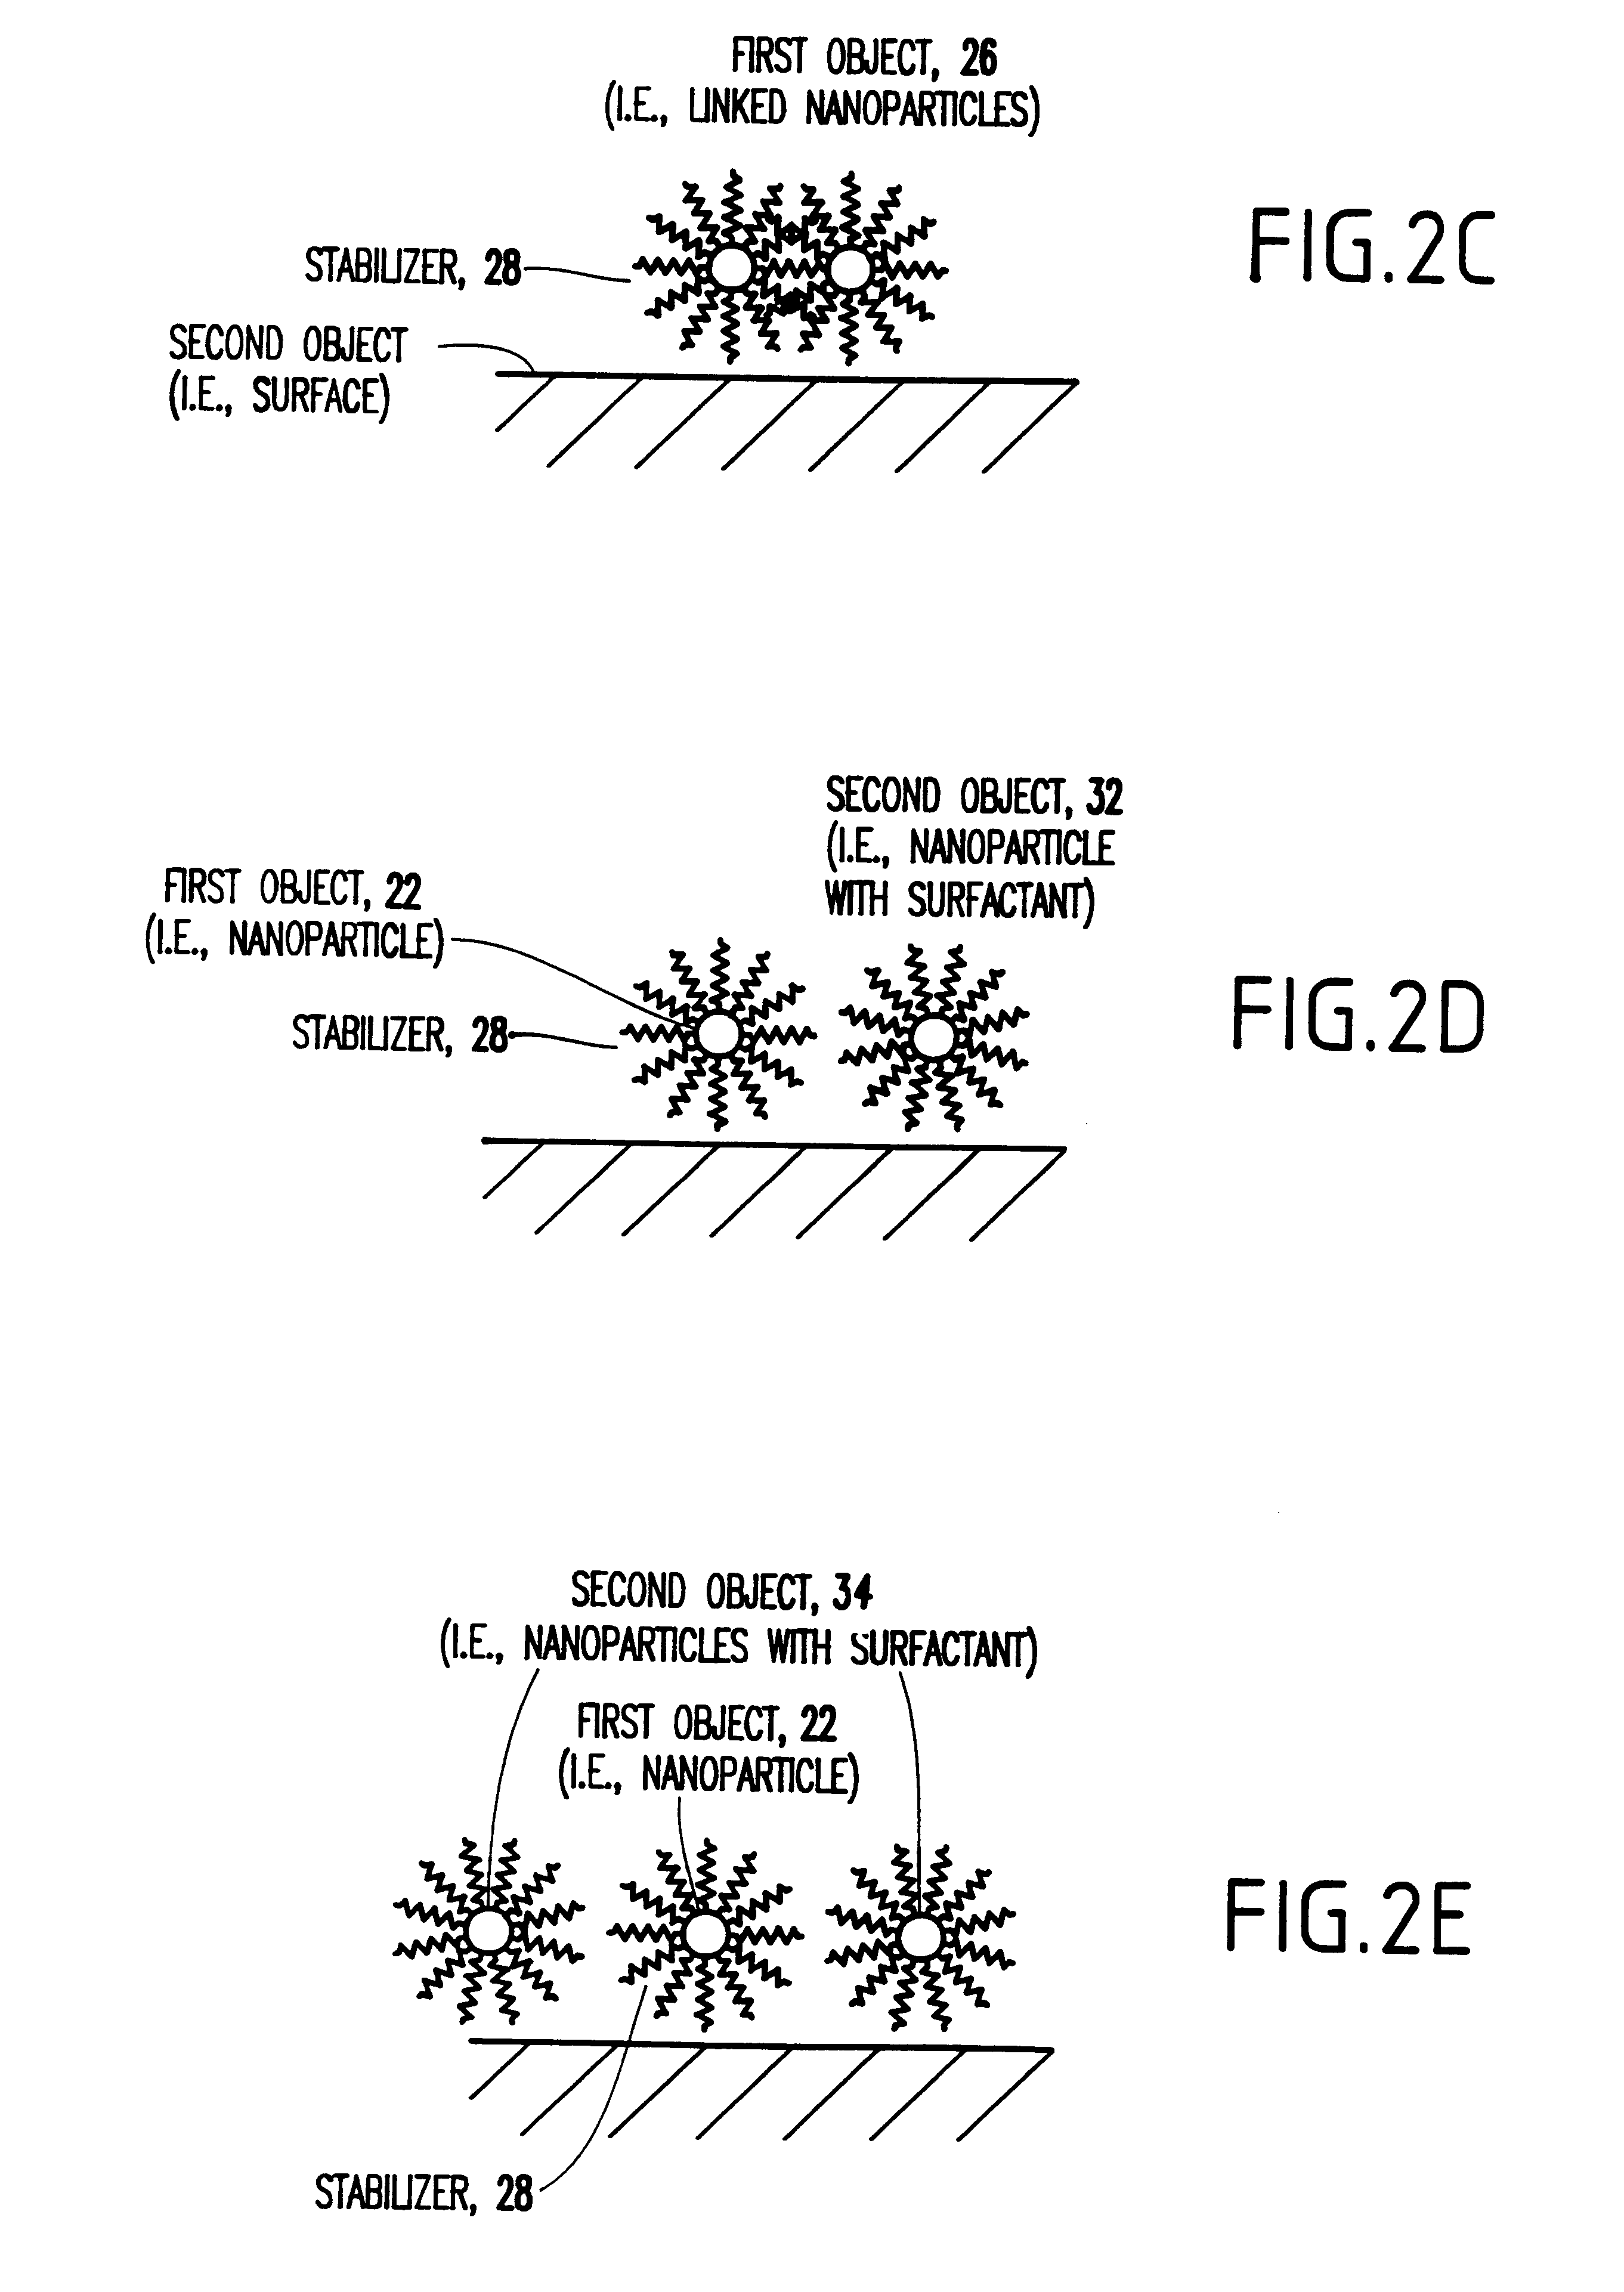 Method and apparatus for linking and/or patterning self-assembled objects